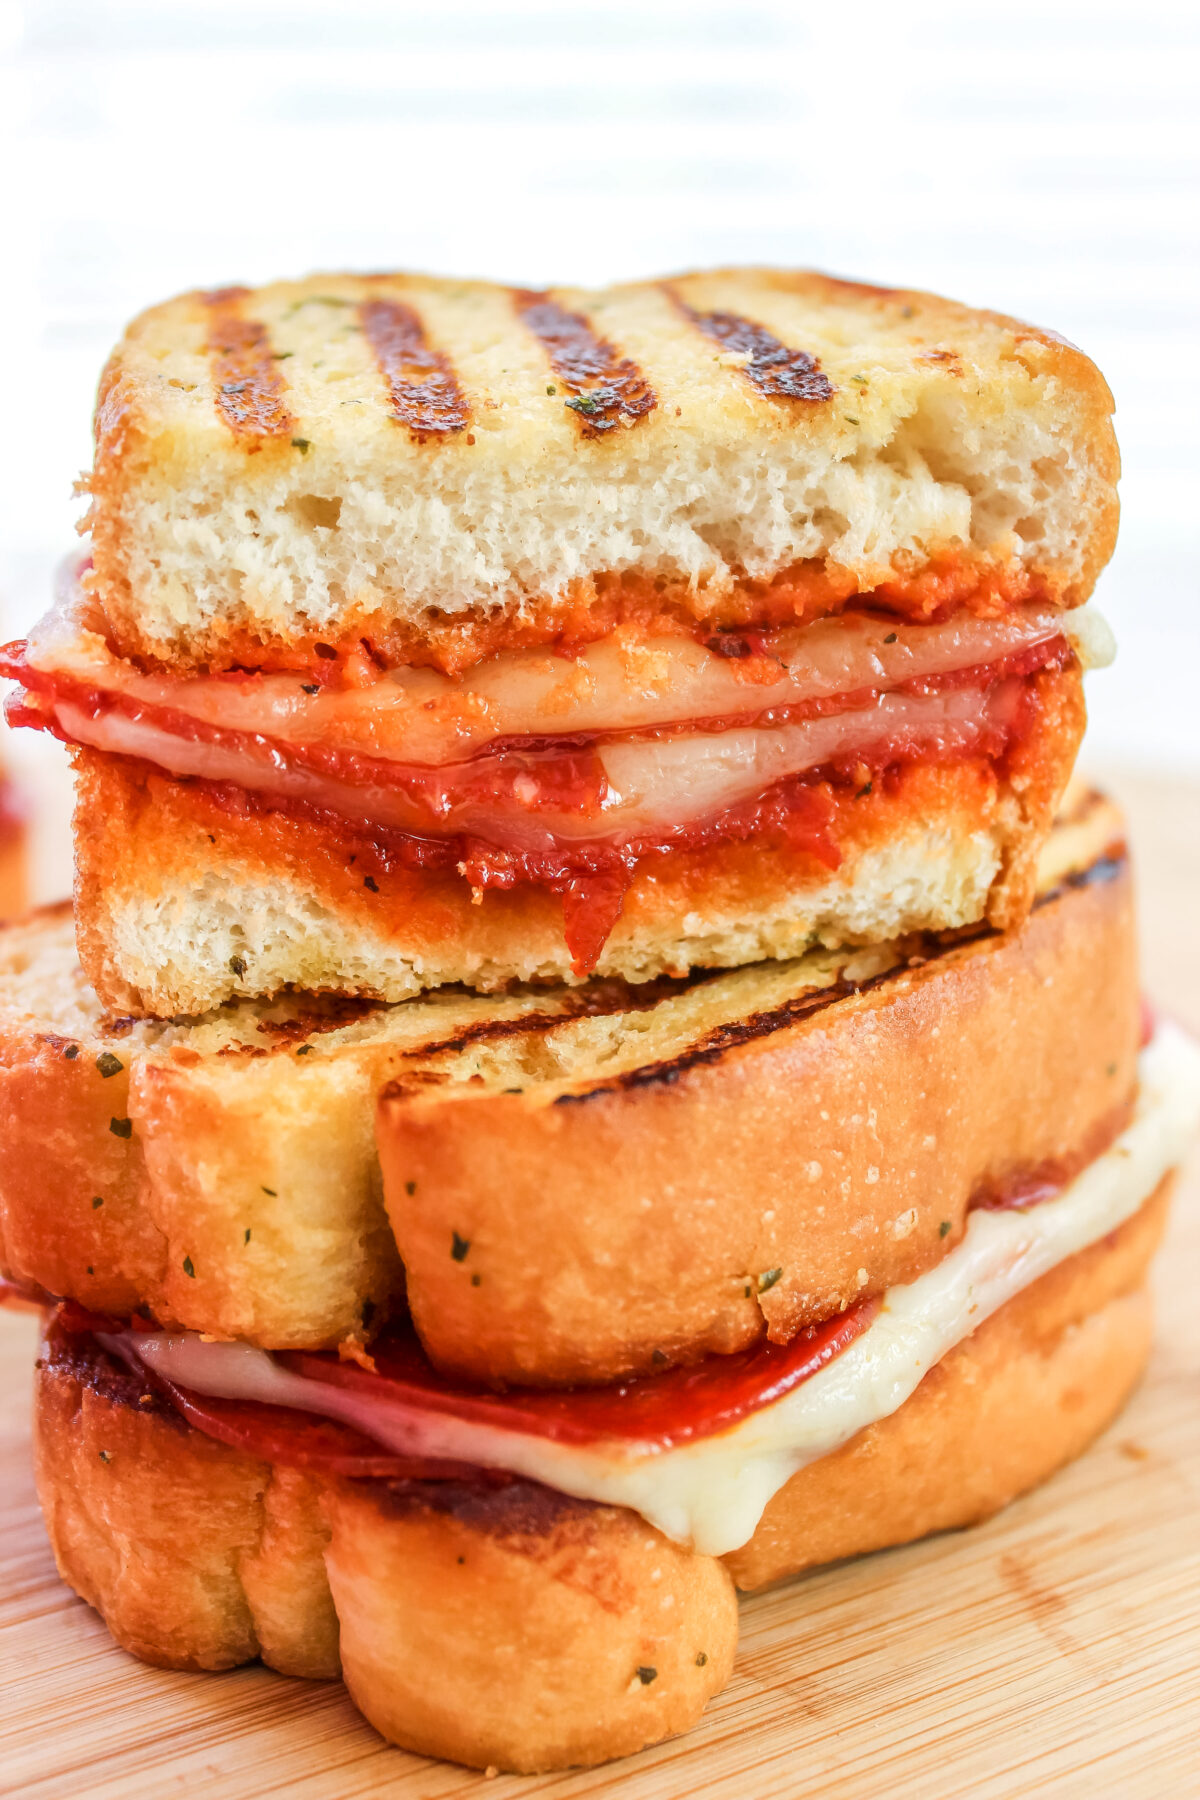 This Grilled Pepperoni Pizza Sandwich is a fun way to eat an old favourite! This easy to make recipe is a tasty spin on a grilled cheese.